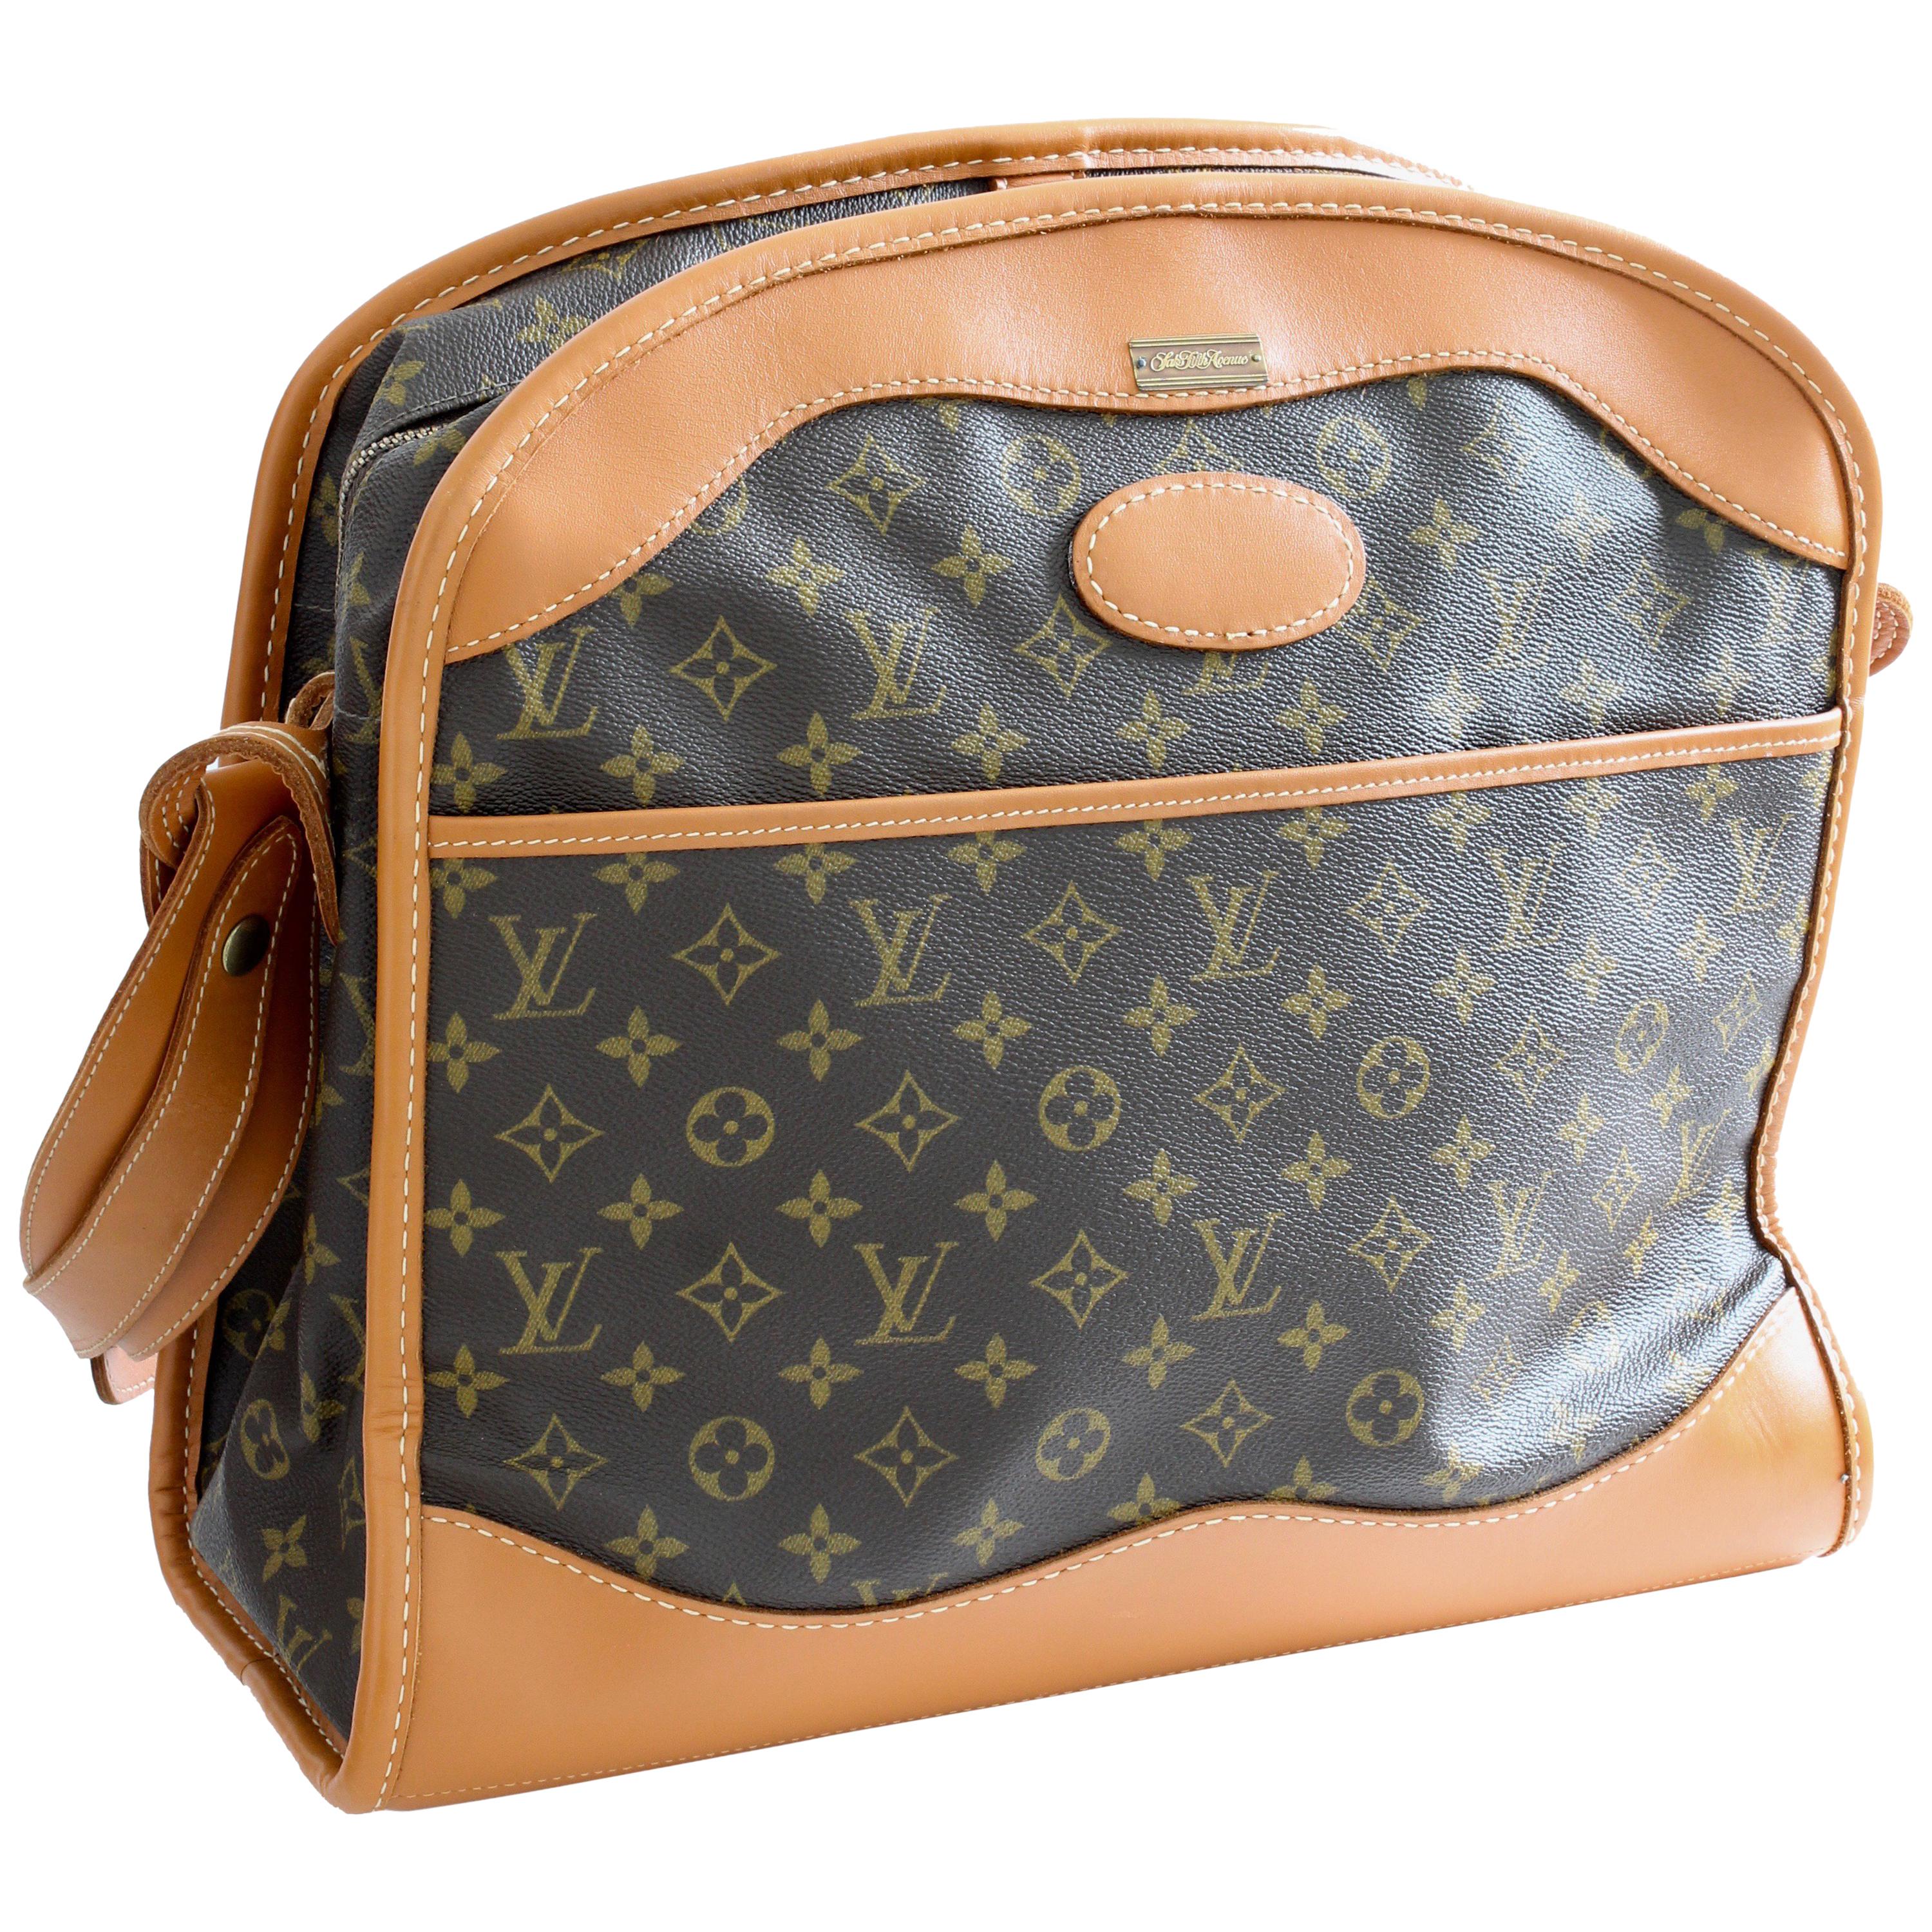 Louis Vuitton Monogram Travel Bag Carry On Shoulder Bag French Co New Old Stock